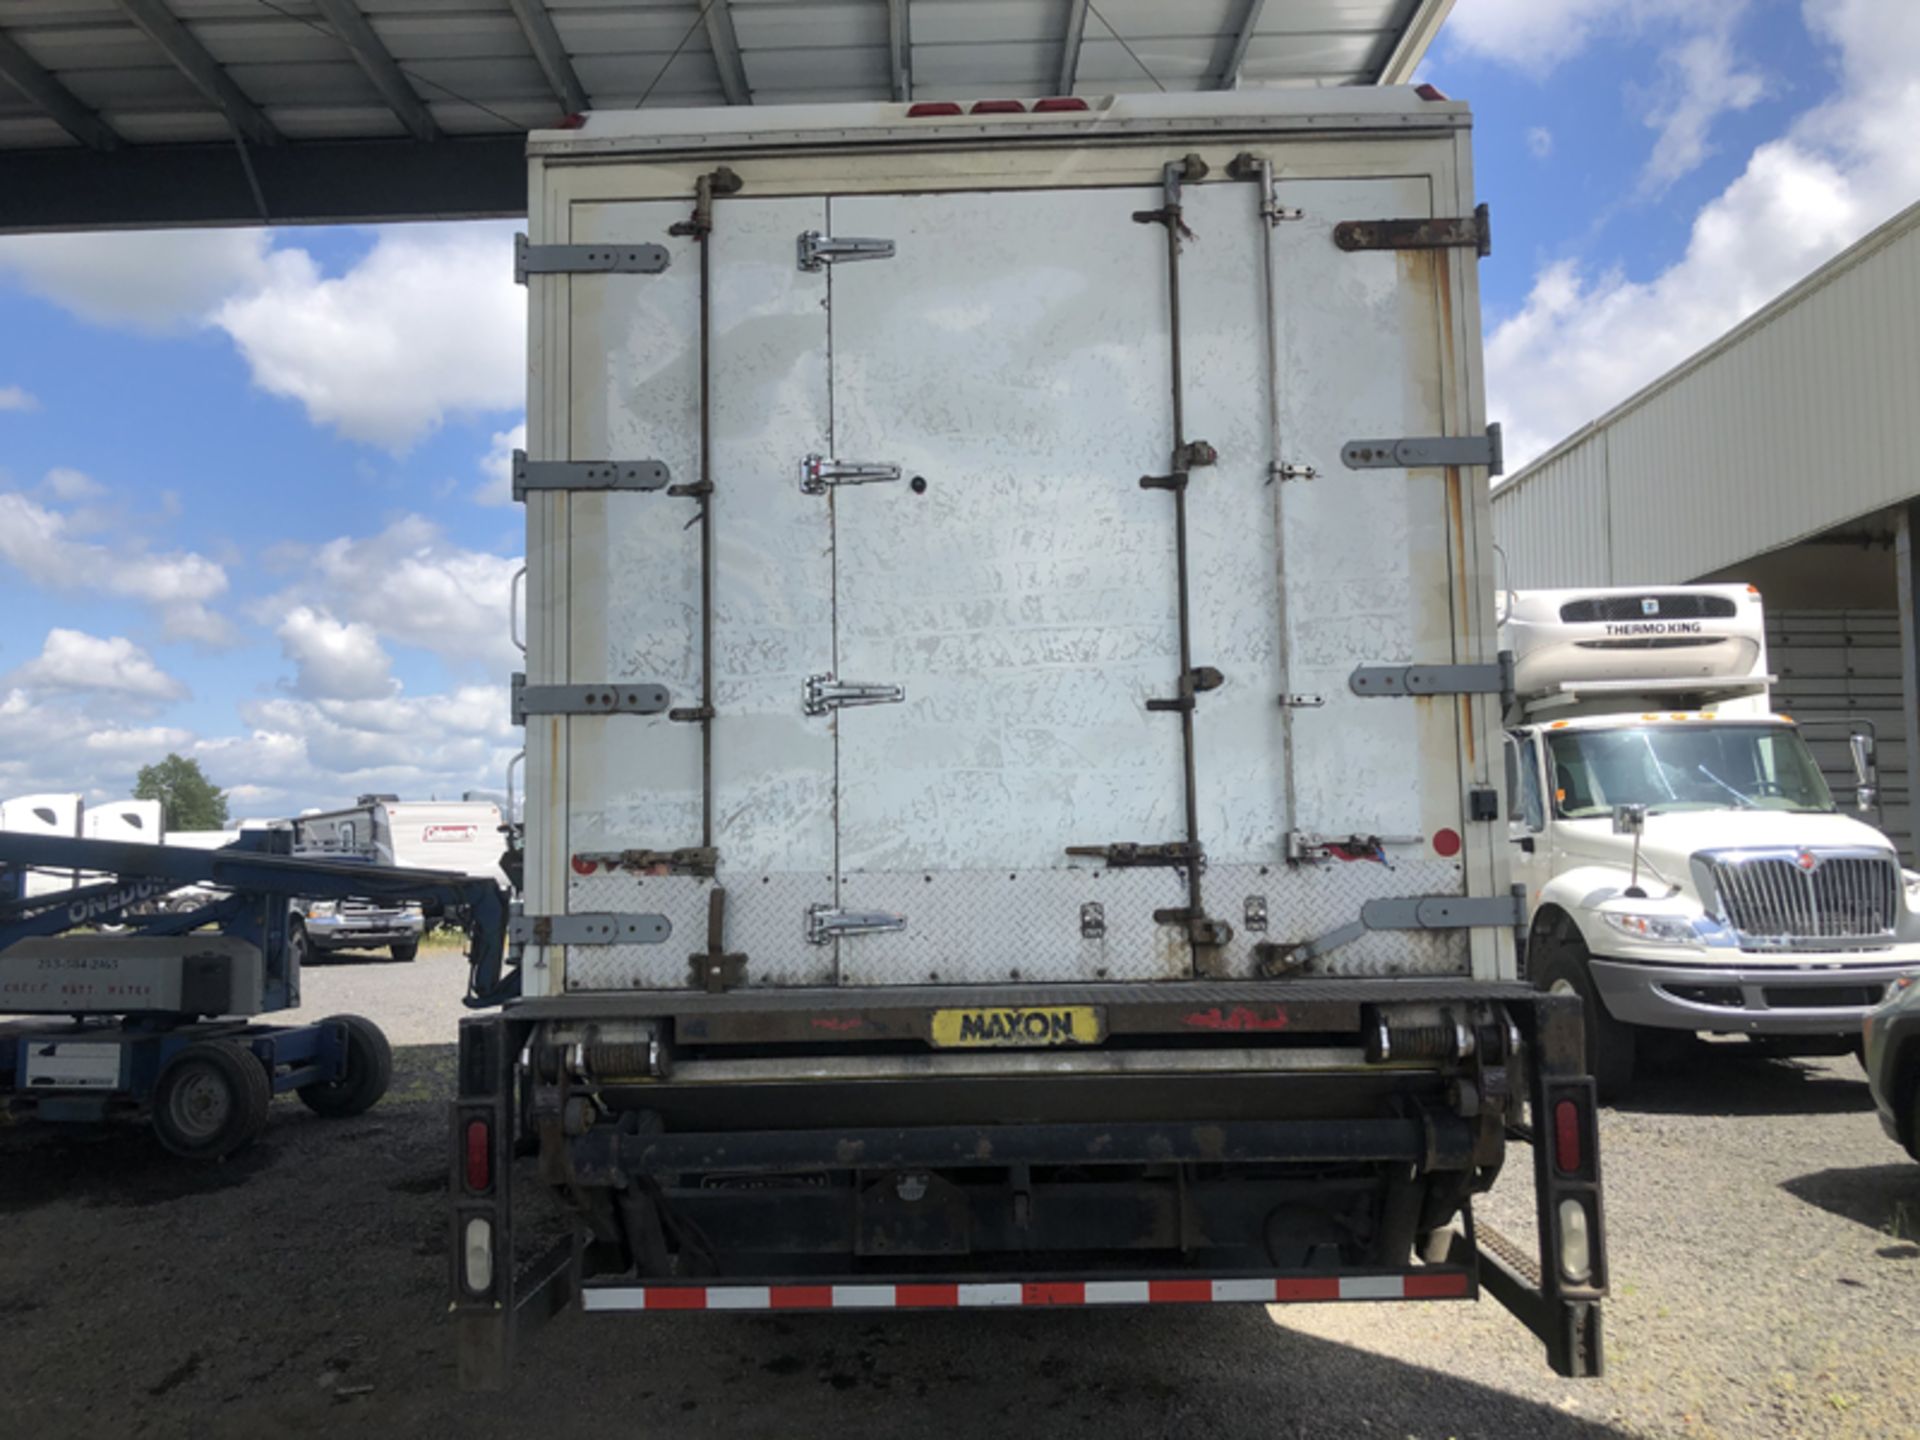 2018 INTERNATIONAL 4400 SBA 6X4 REFRIGERATED BOX TRUCK VIN#: 1HTMSTARXJH529701, Approx Miles: 72681, - Image 6 of 12